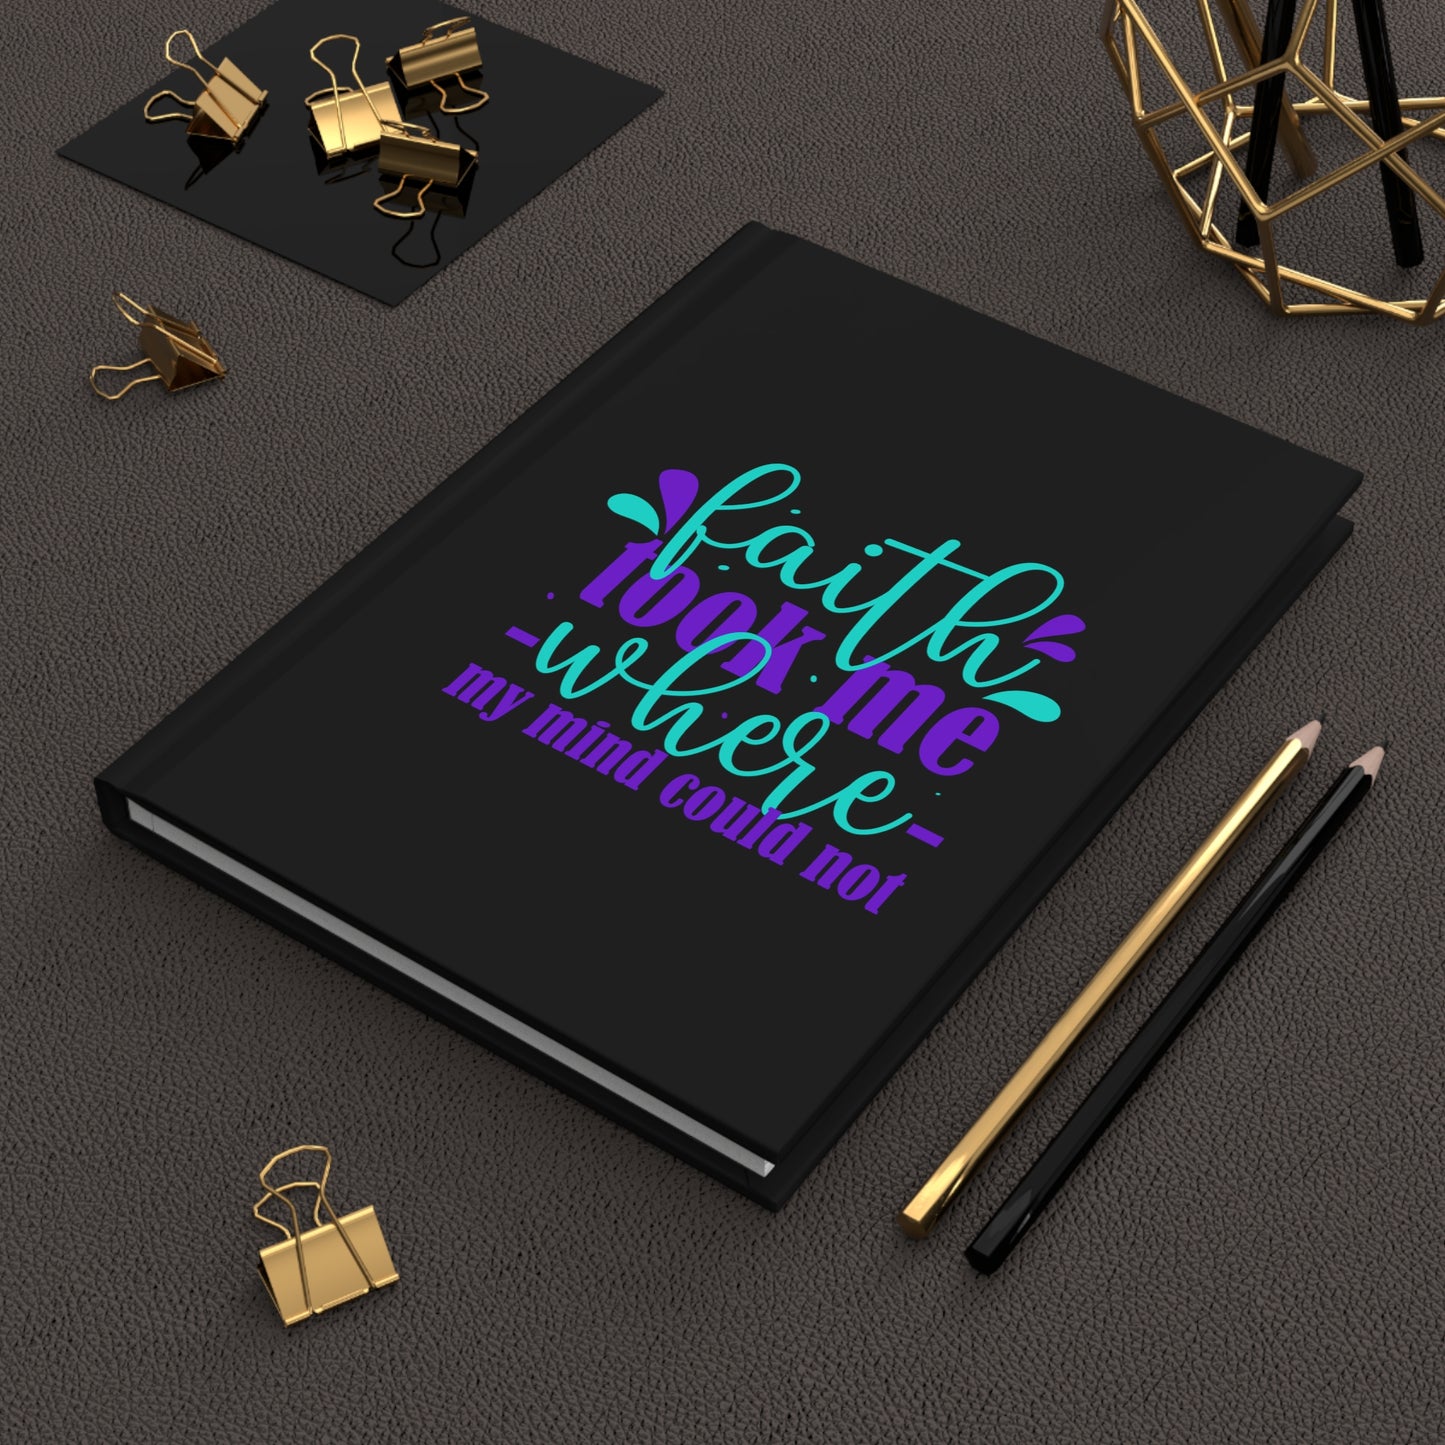 Faith Took Me Where My Mind Could Not Hardcover Journal Matte